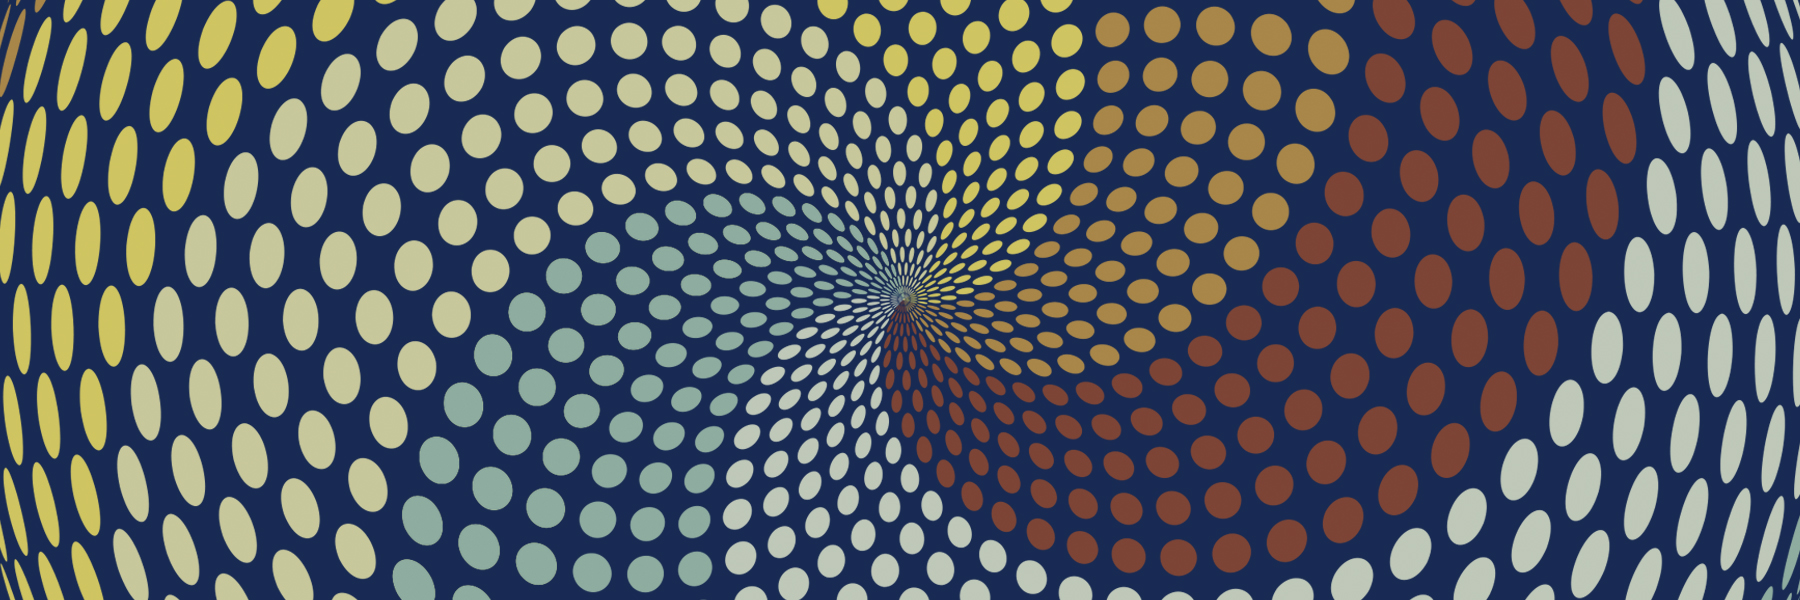 Graphic Swirling dots